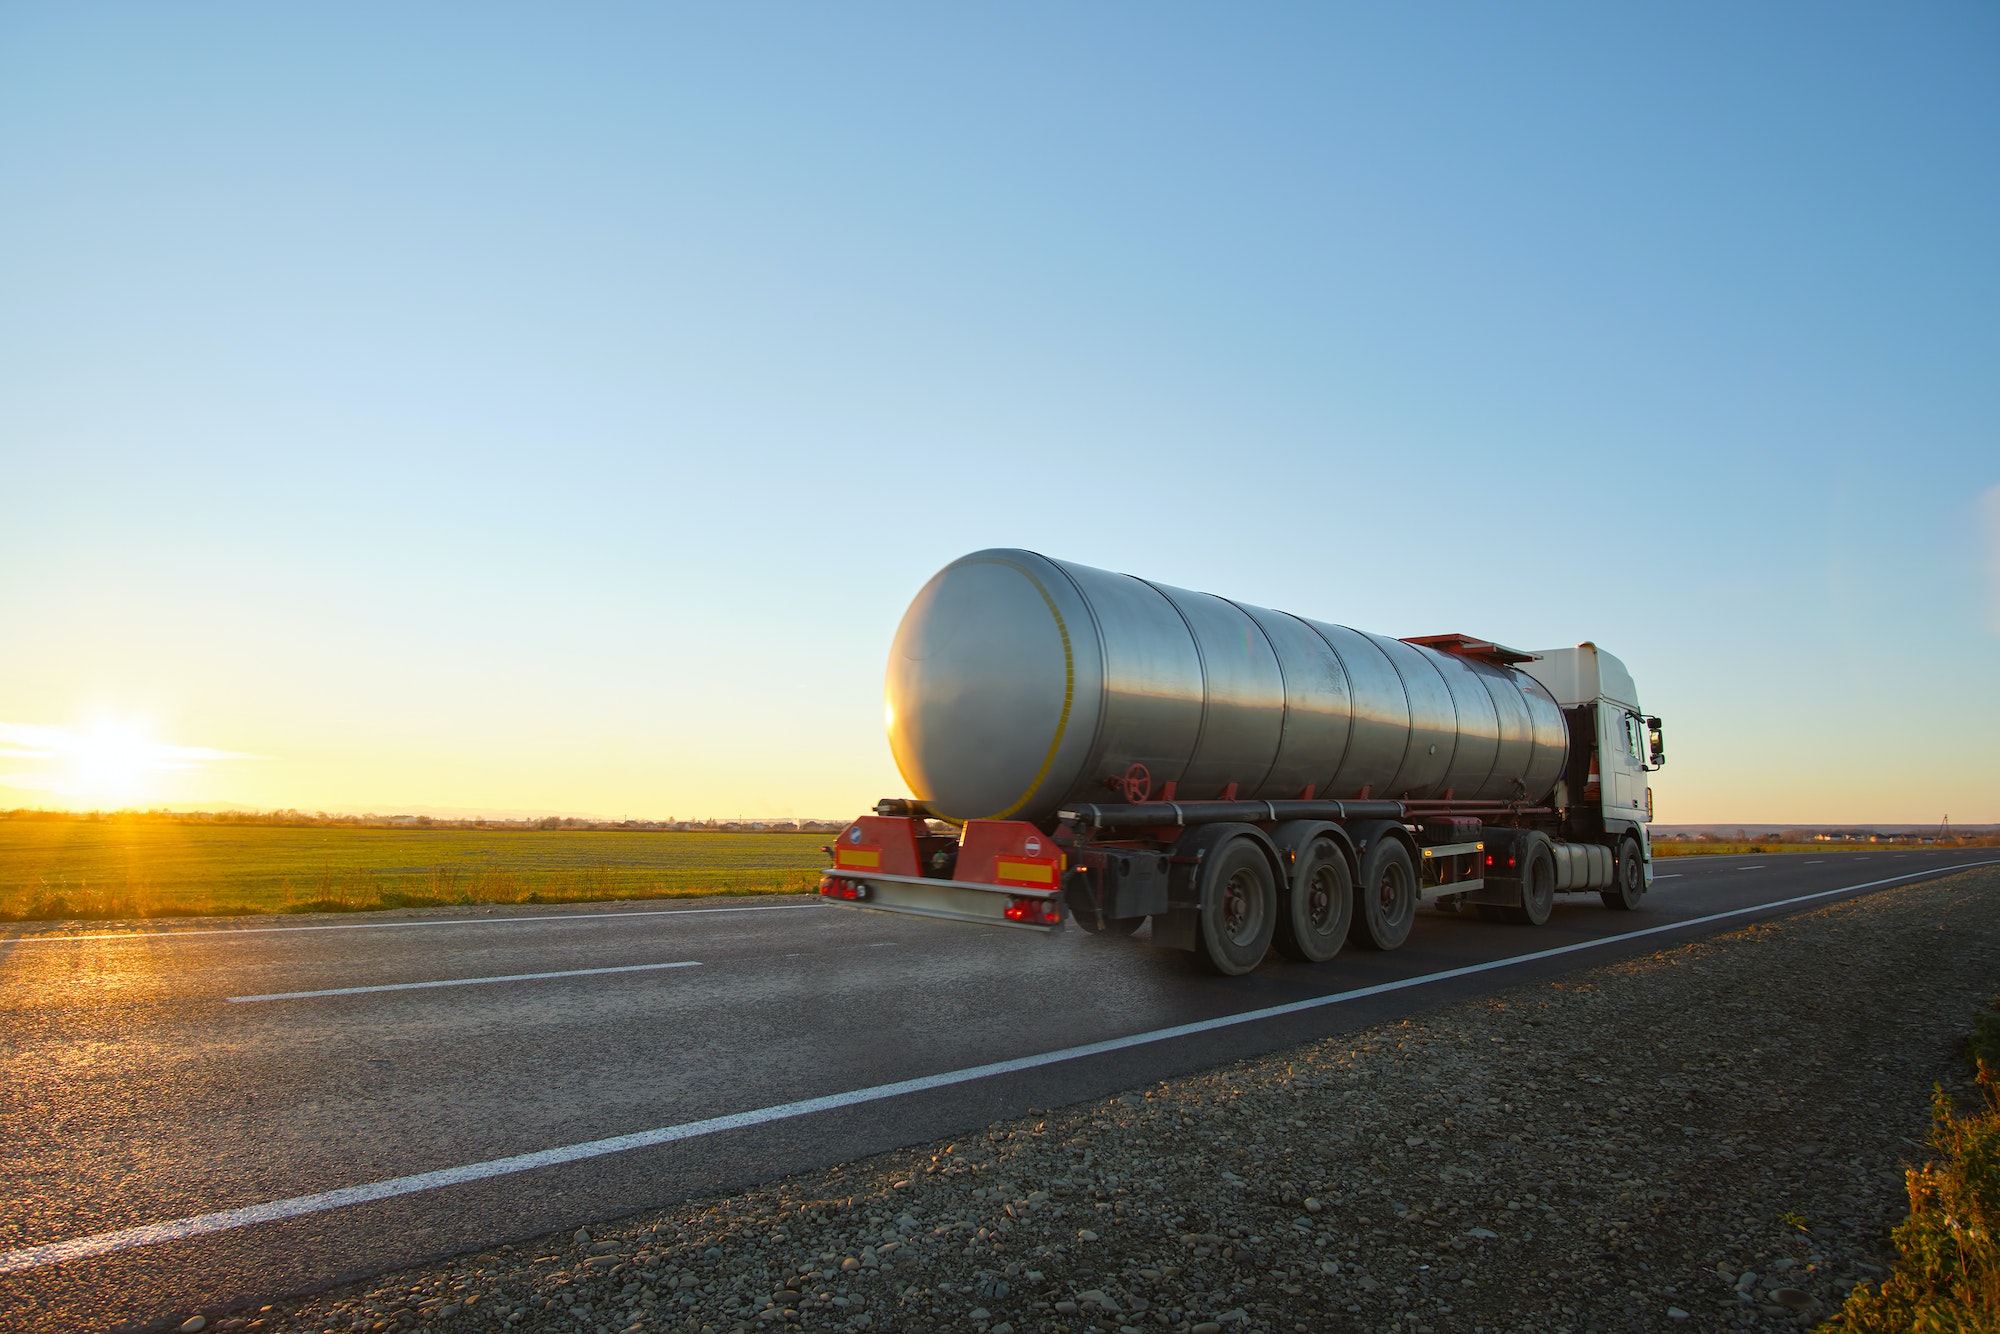 Petrol cargo truck driving on highway hauling oil products. Delivery transportation and logistics